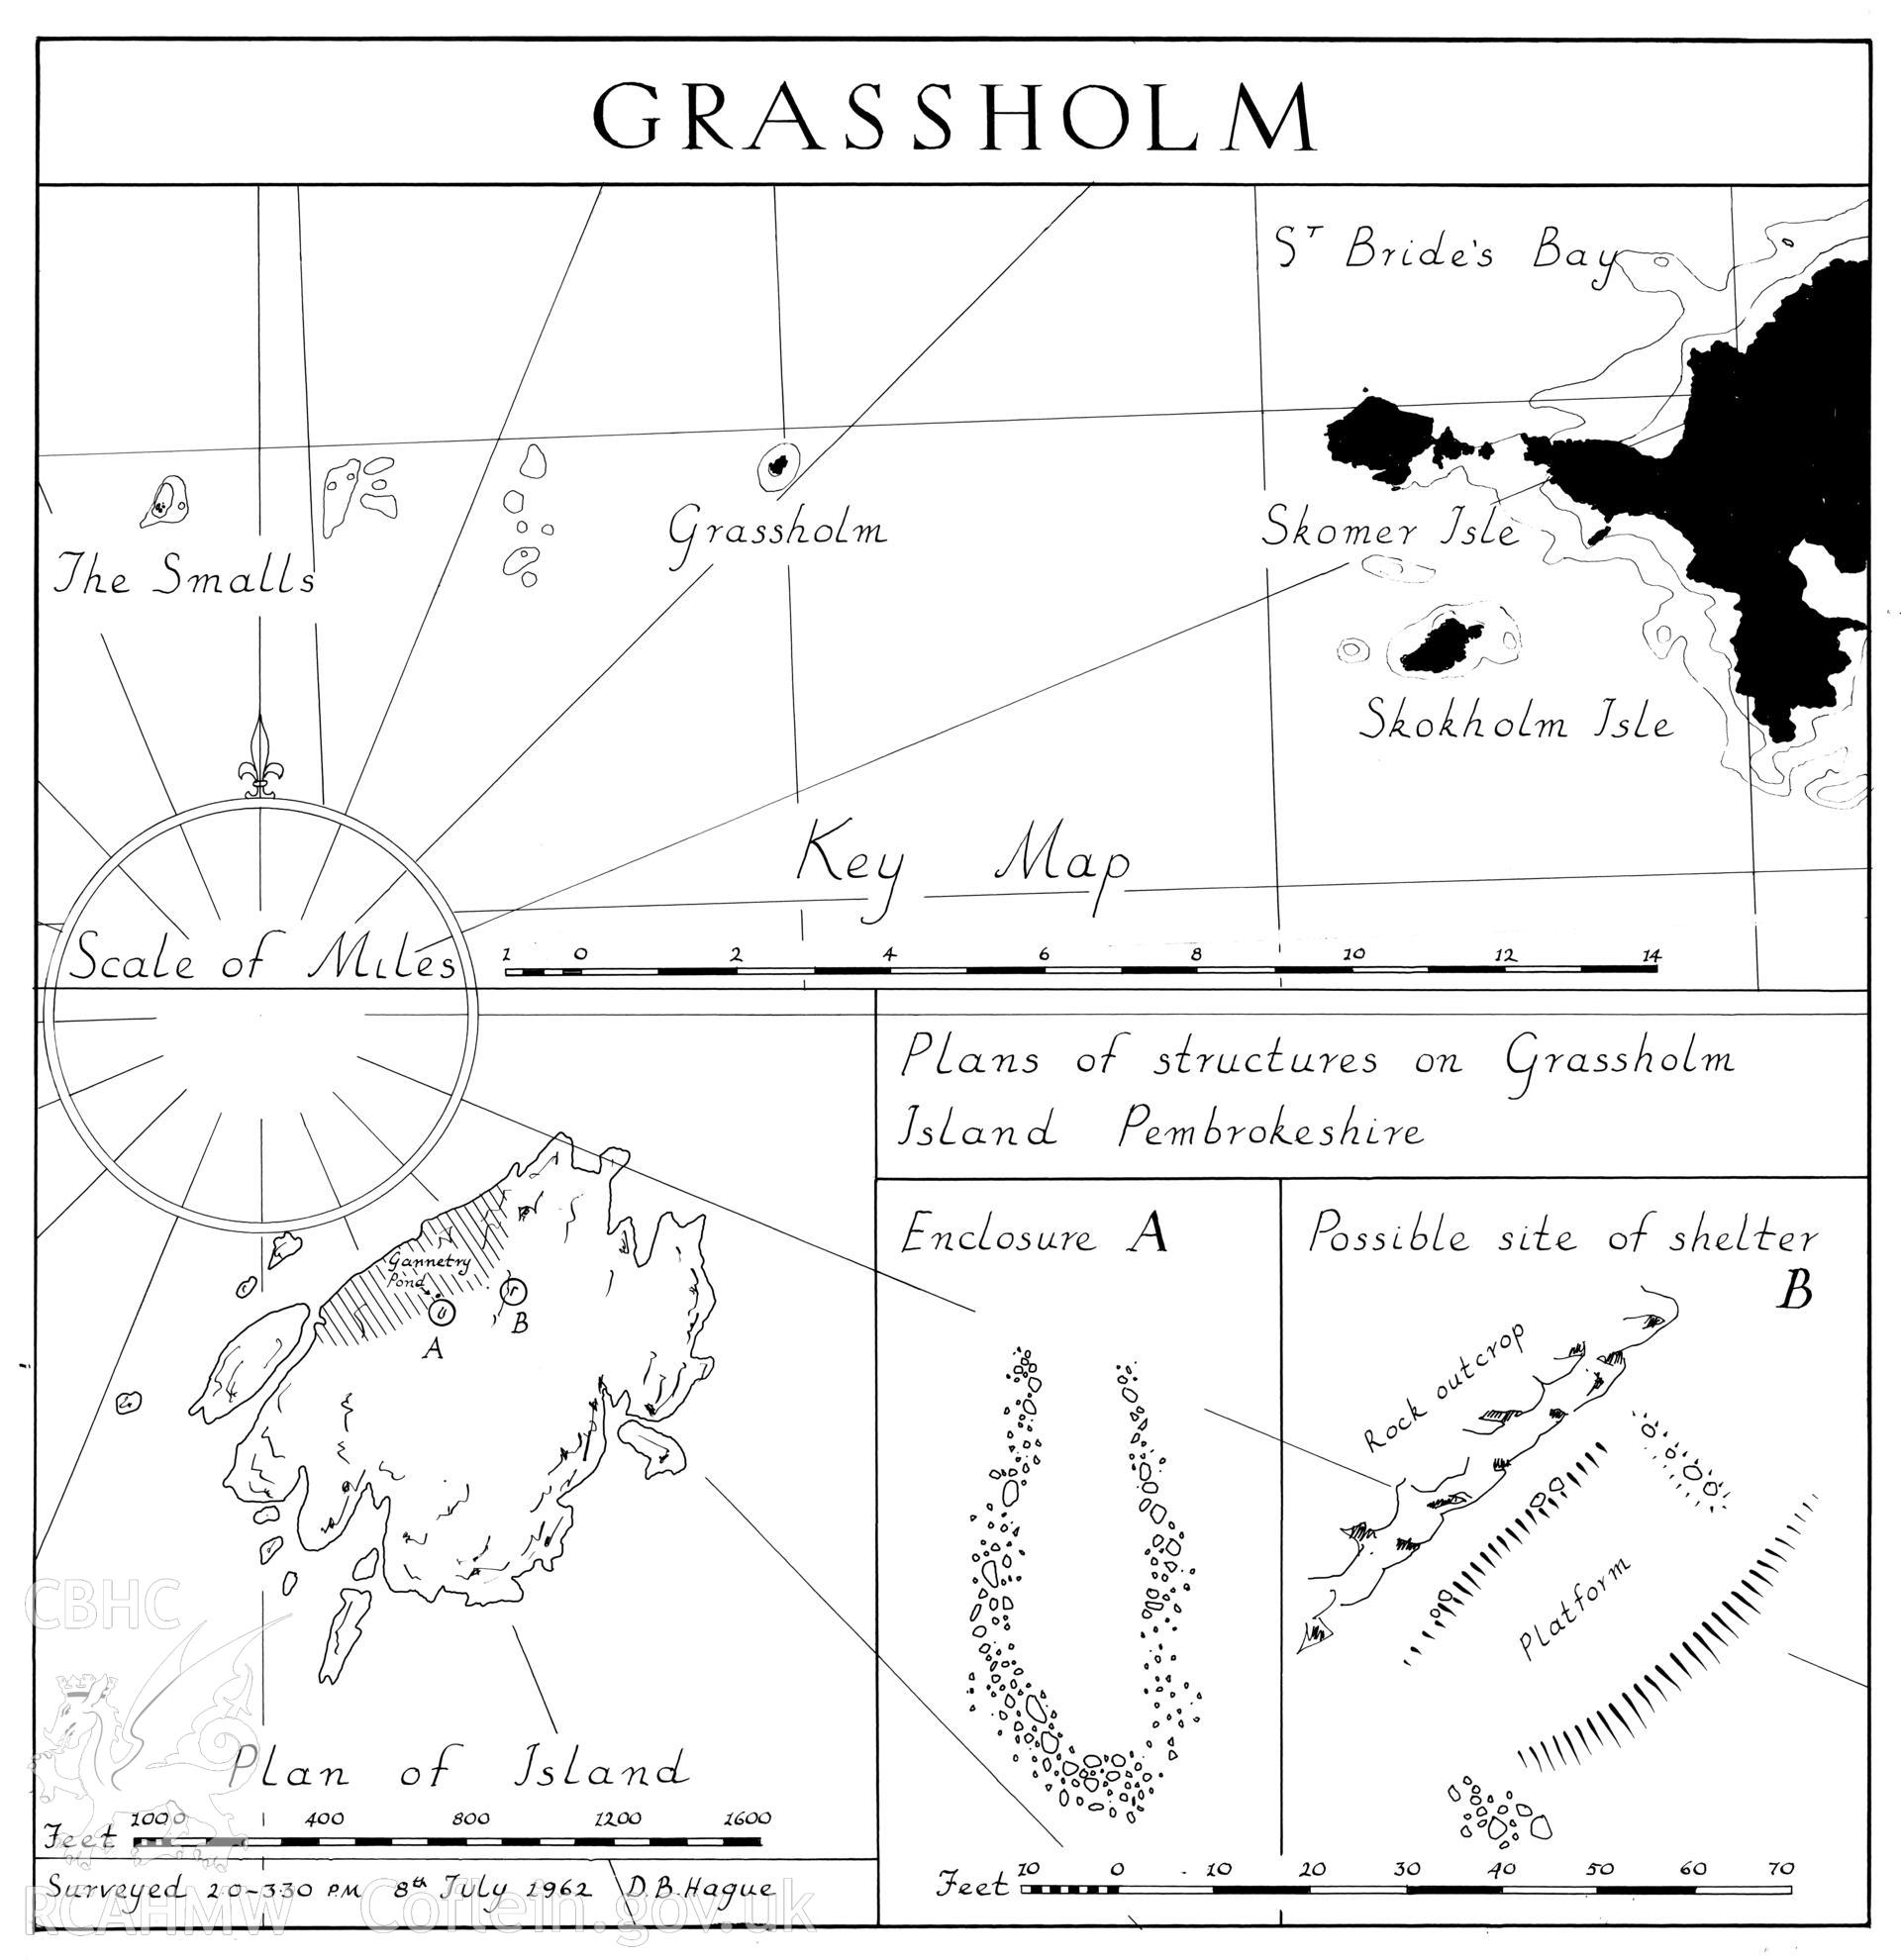 Drawing by Douglas Hague showing Grassholm Island comprising key map, map of the island and plans of structures on the island.